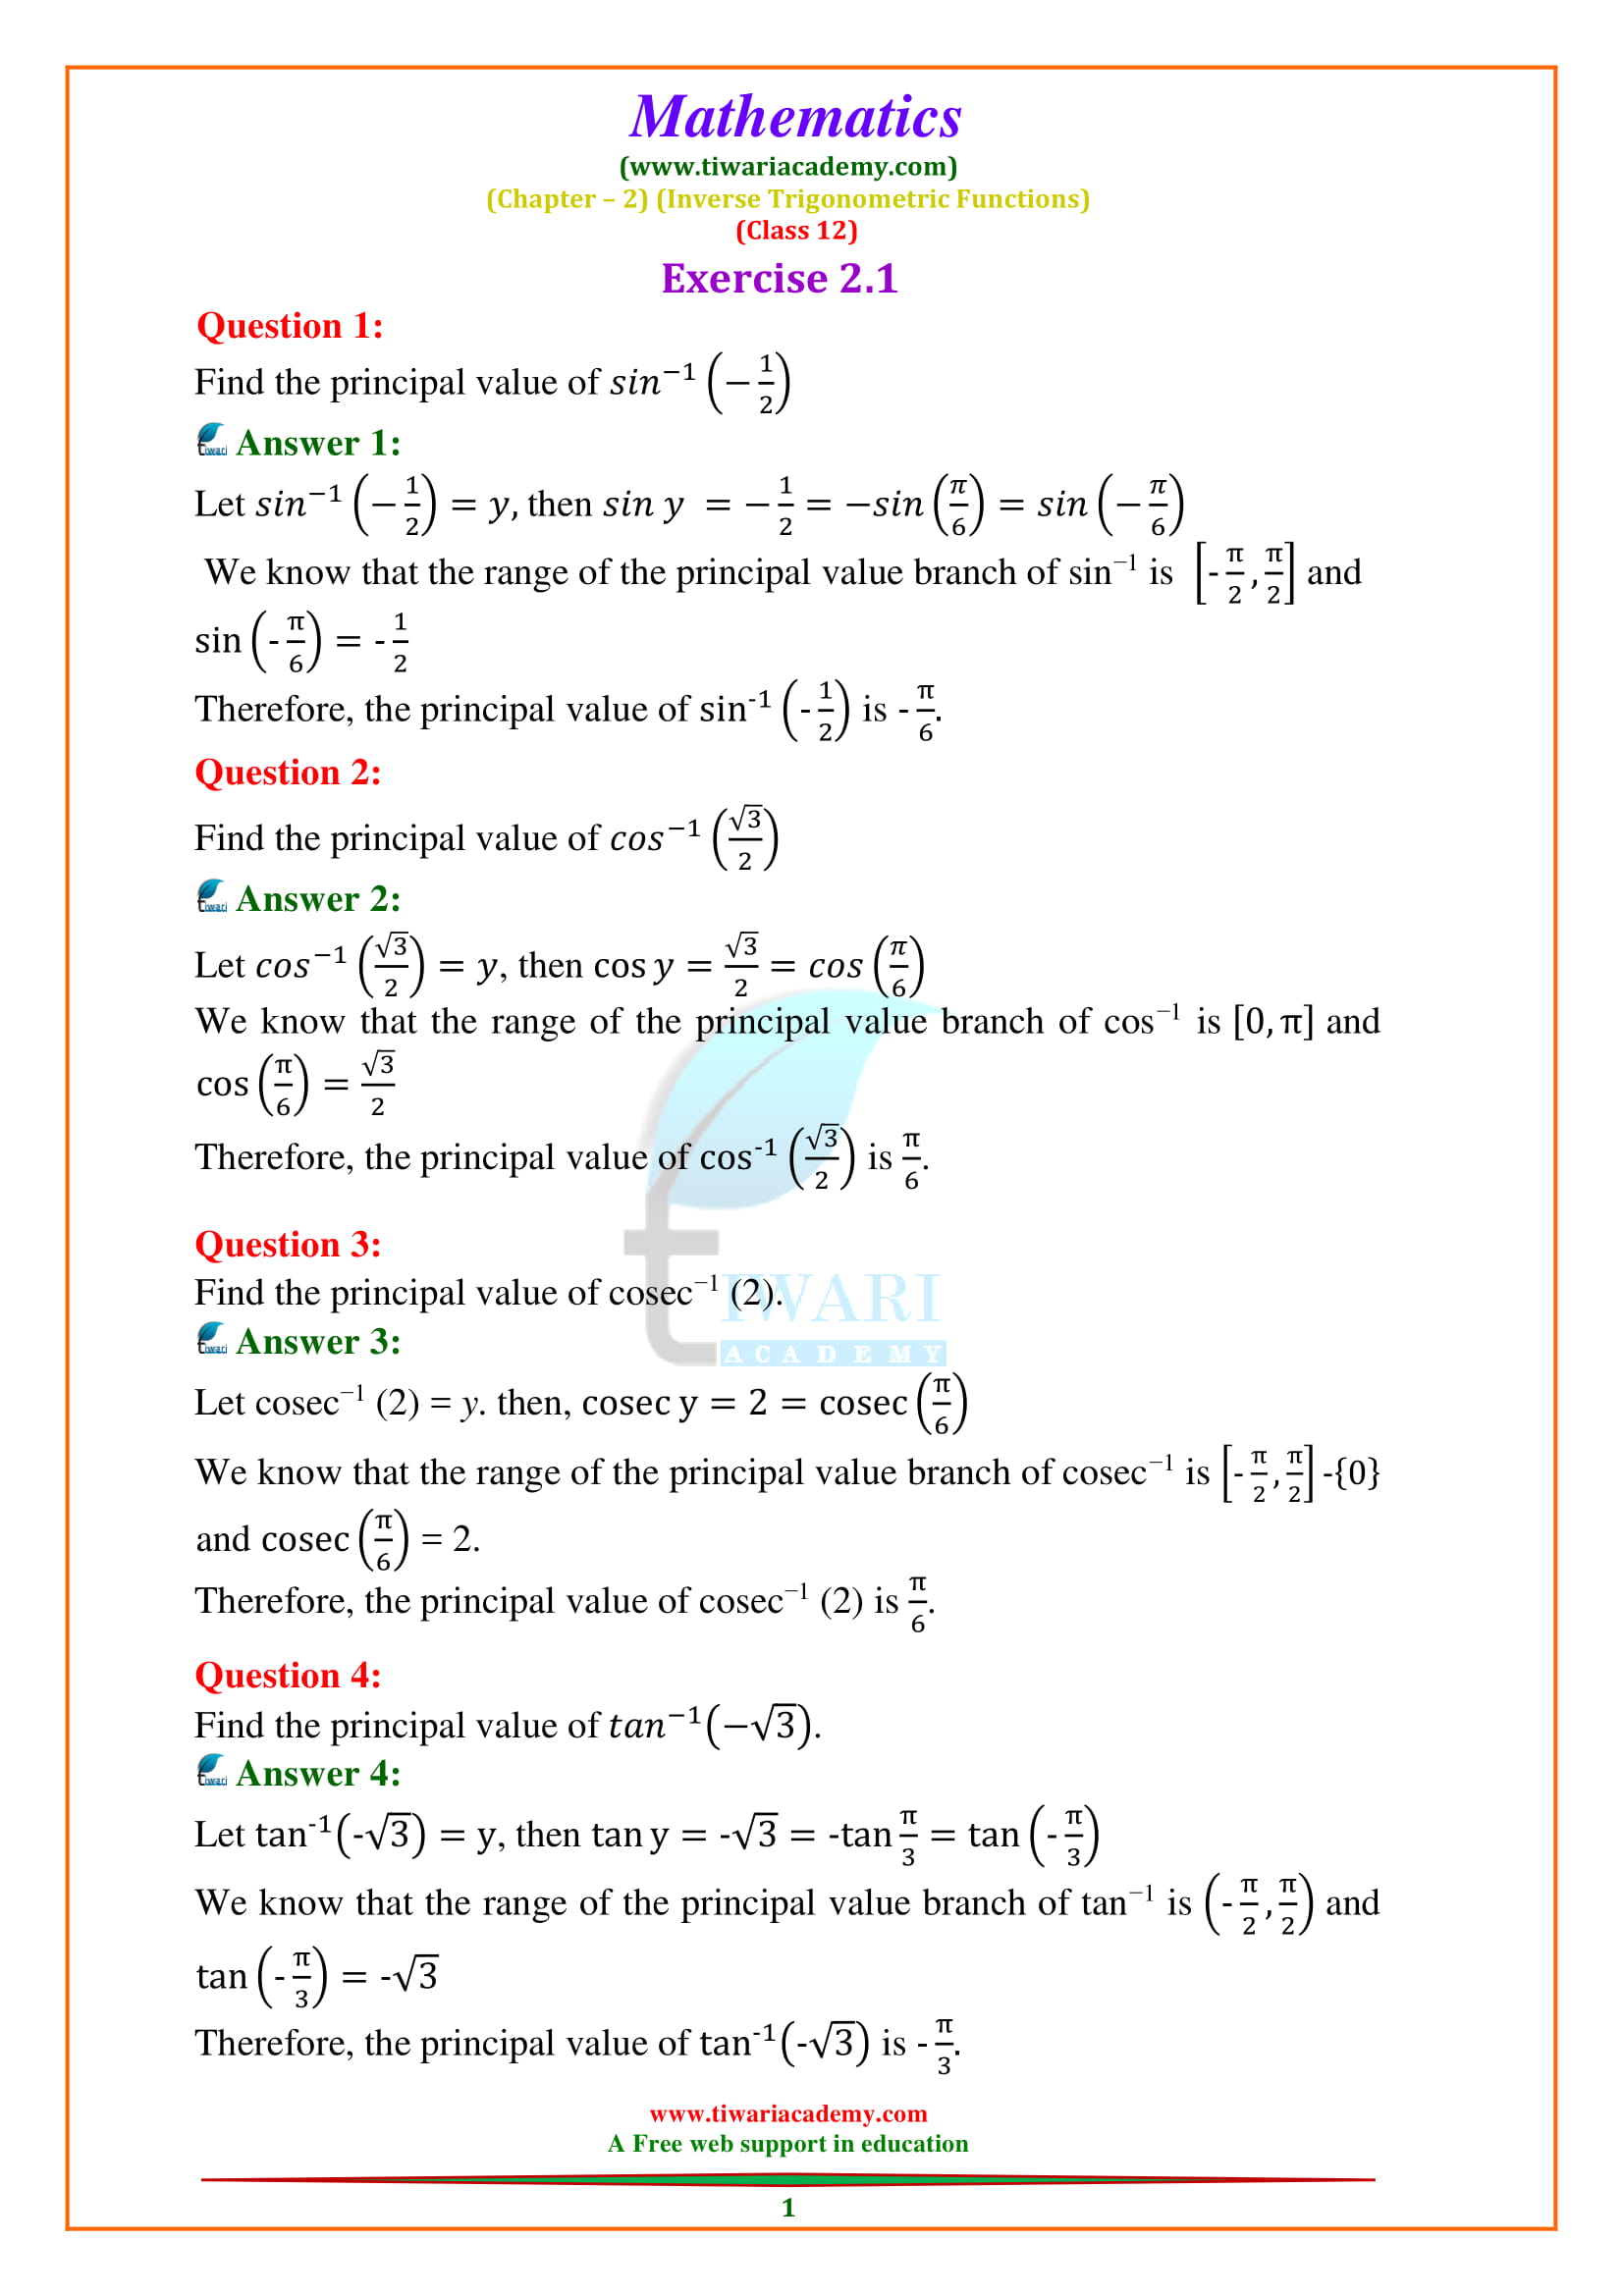 NCERT Solutions for Class 12 Maths Chapter 2 Exercise 2.1 Inverse Trigonometric Functions